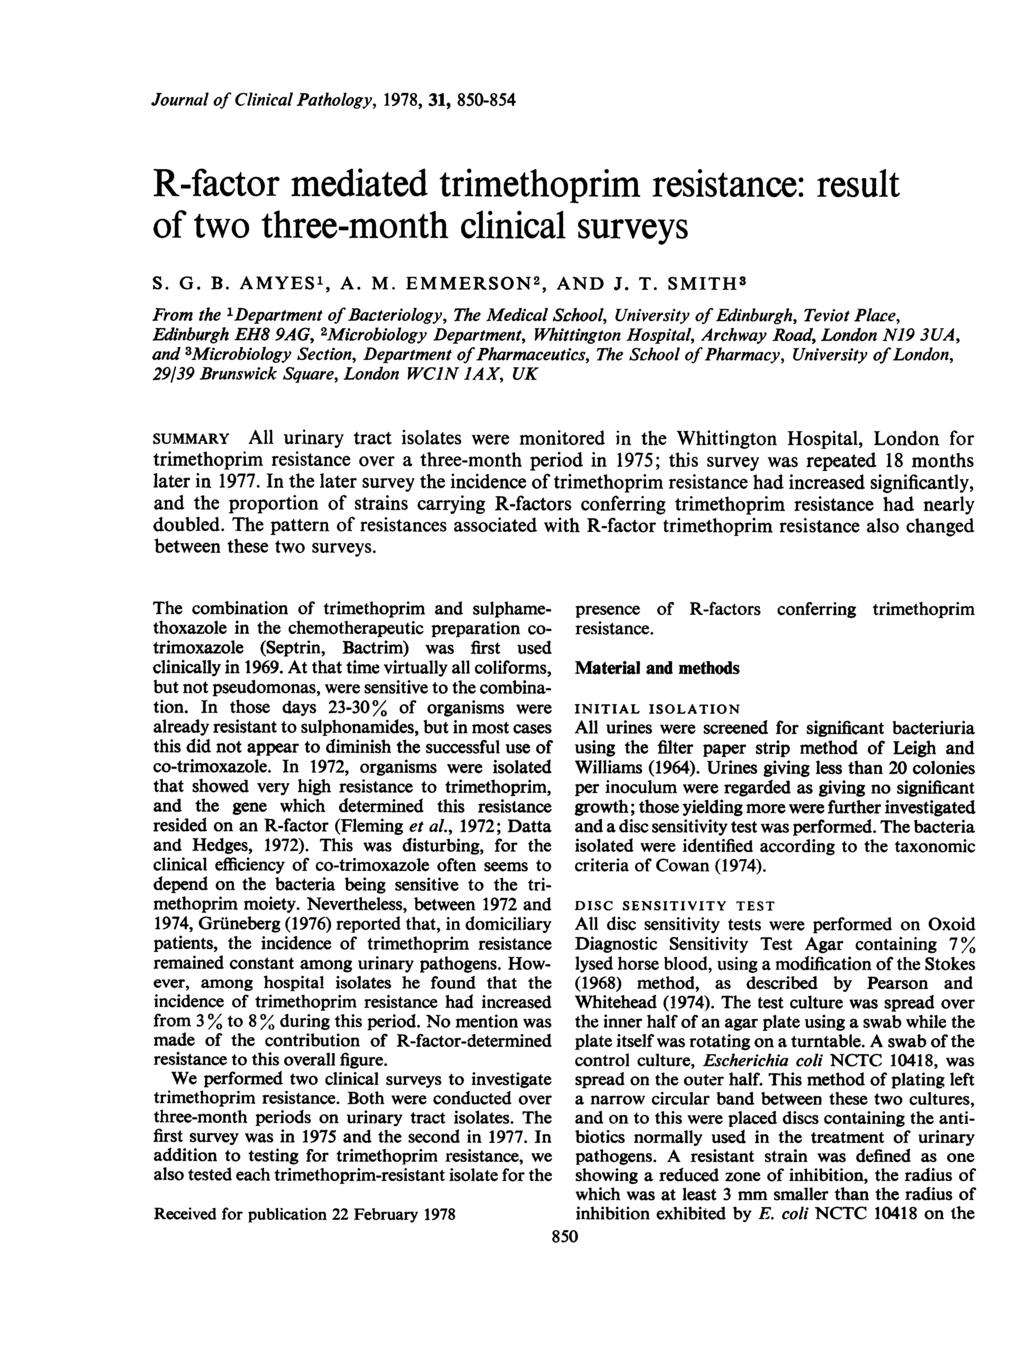 Journal of Clinical Pathology, 1978, 31, 850-854 R-factor mediated trimethoprim resistance: result of two three-month clinical surveys S. G. B. AMYES1, A. M. EMMERSON2, AND J. T.